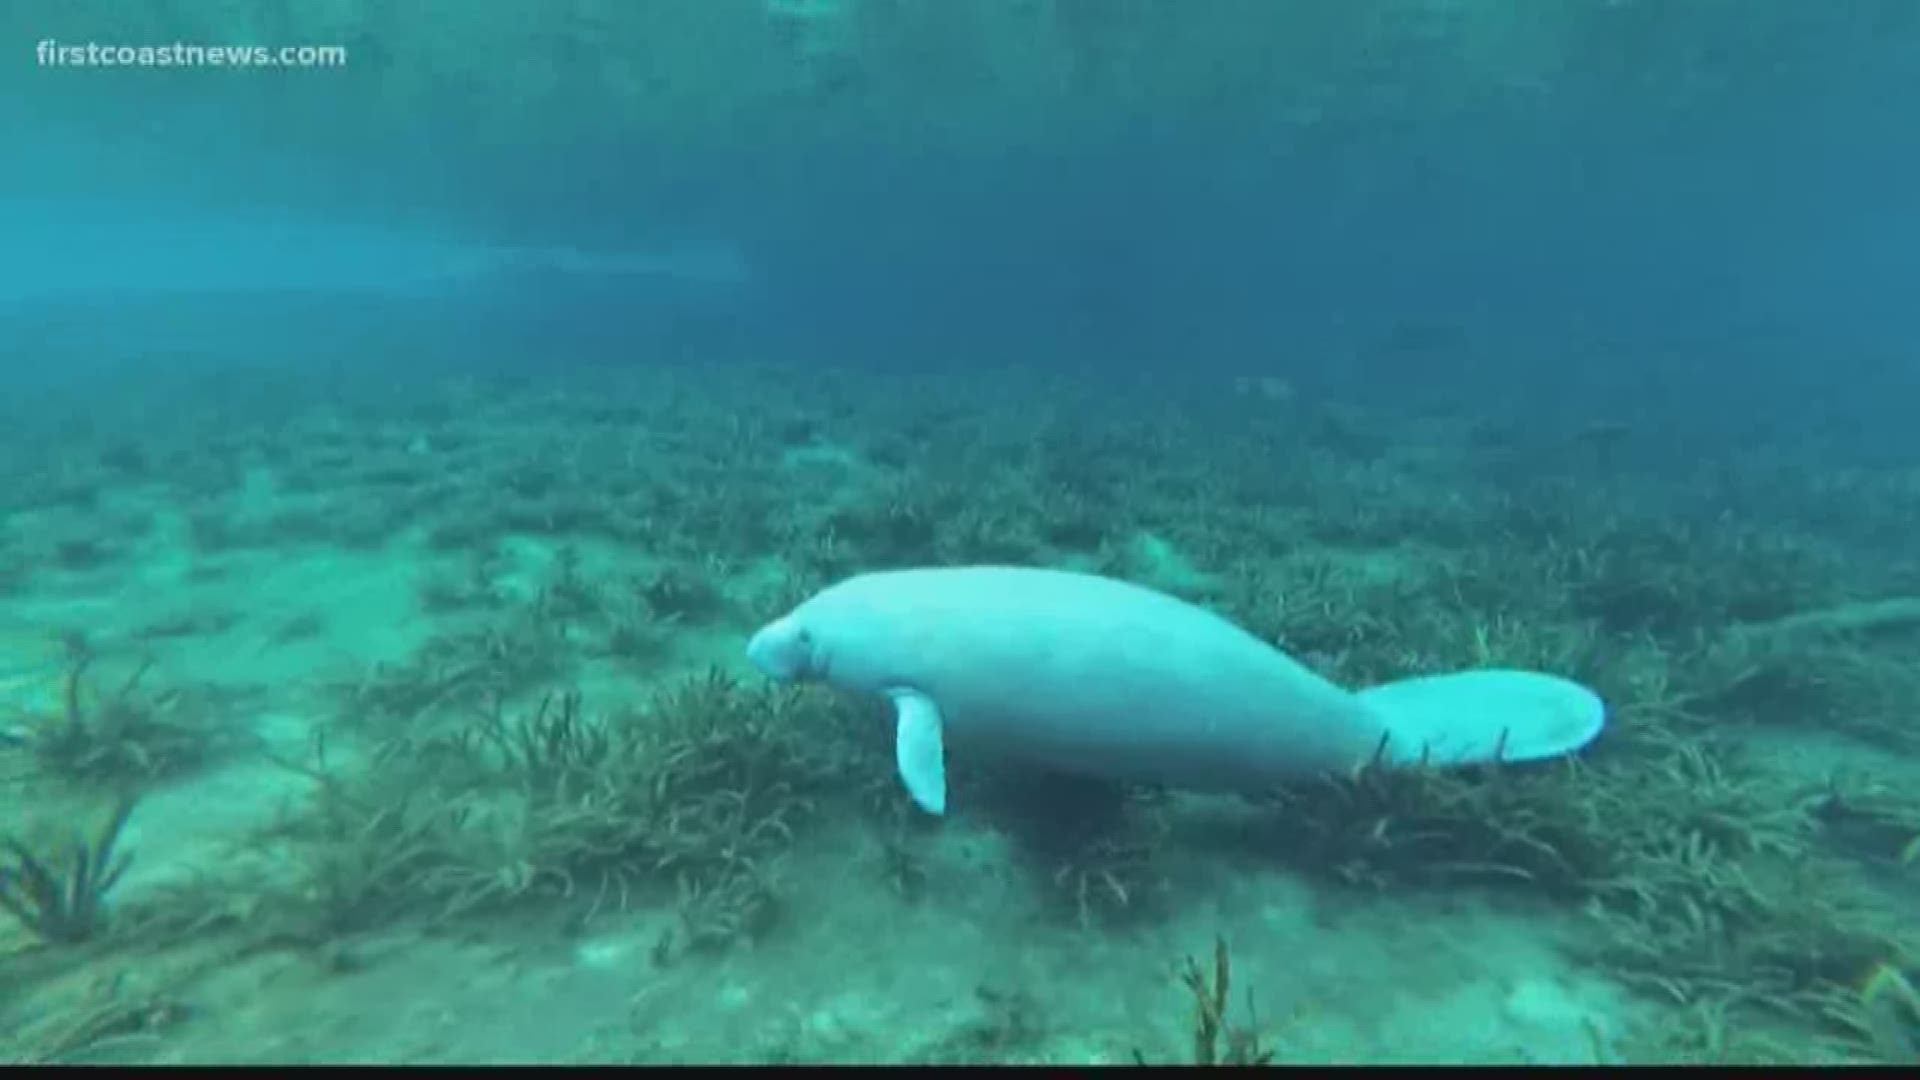 While the Florida manatee population has rebounded in recent years, more and more of the mammals are dying in mostly preventable boat strikes.